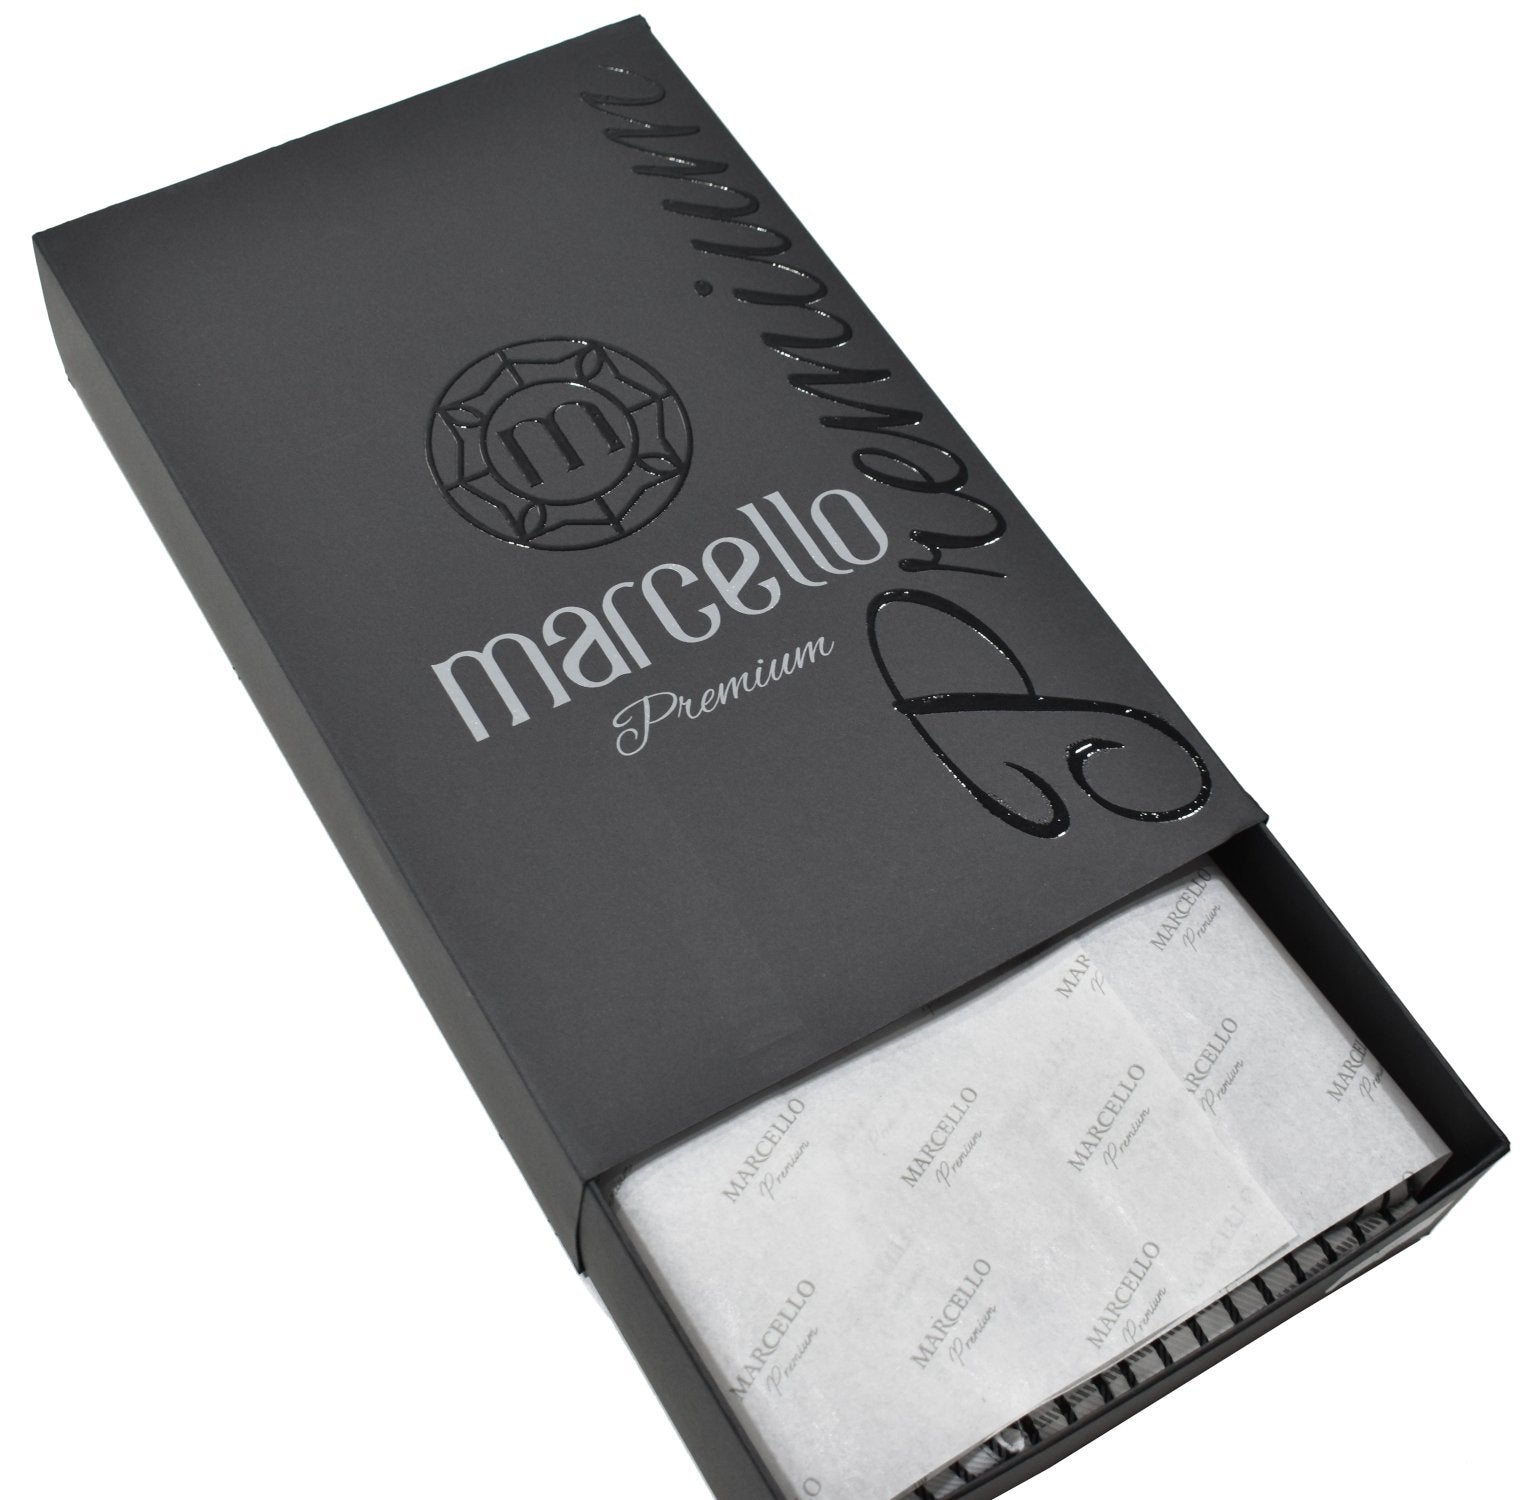 Elevate your wardrobe with the Marcello Premium Shadow Diamond Tag shirt. Crafted from extra fine fabrics sourced from fine Italian mills, our Marcello Premium program offers 100's 2 ply shirts in rich classic patterns. With the Marcello exclusive one piece roll collar, you'll feel confident and stylish in any setting.